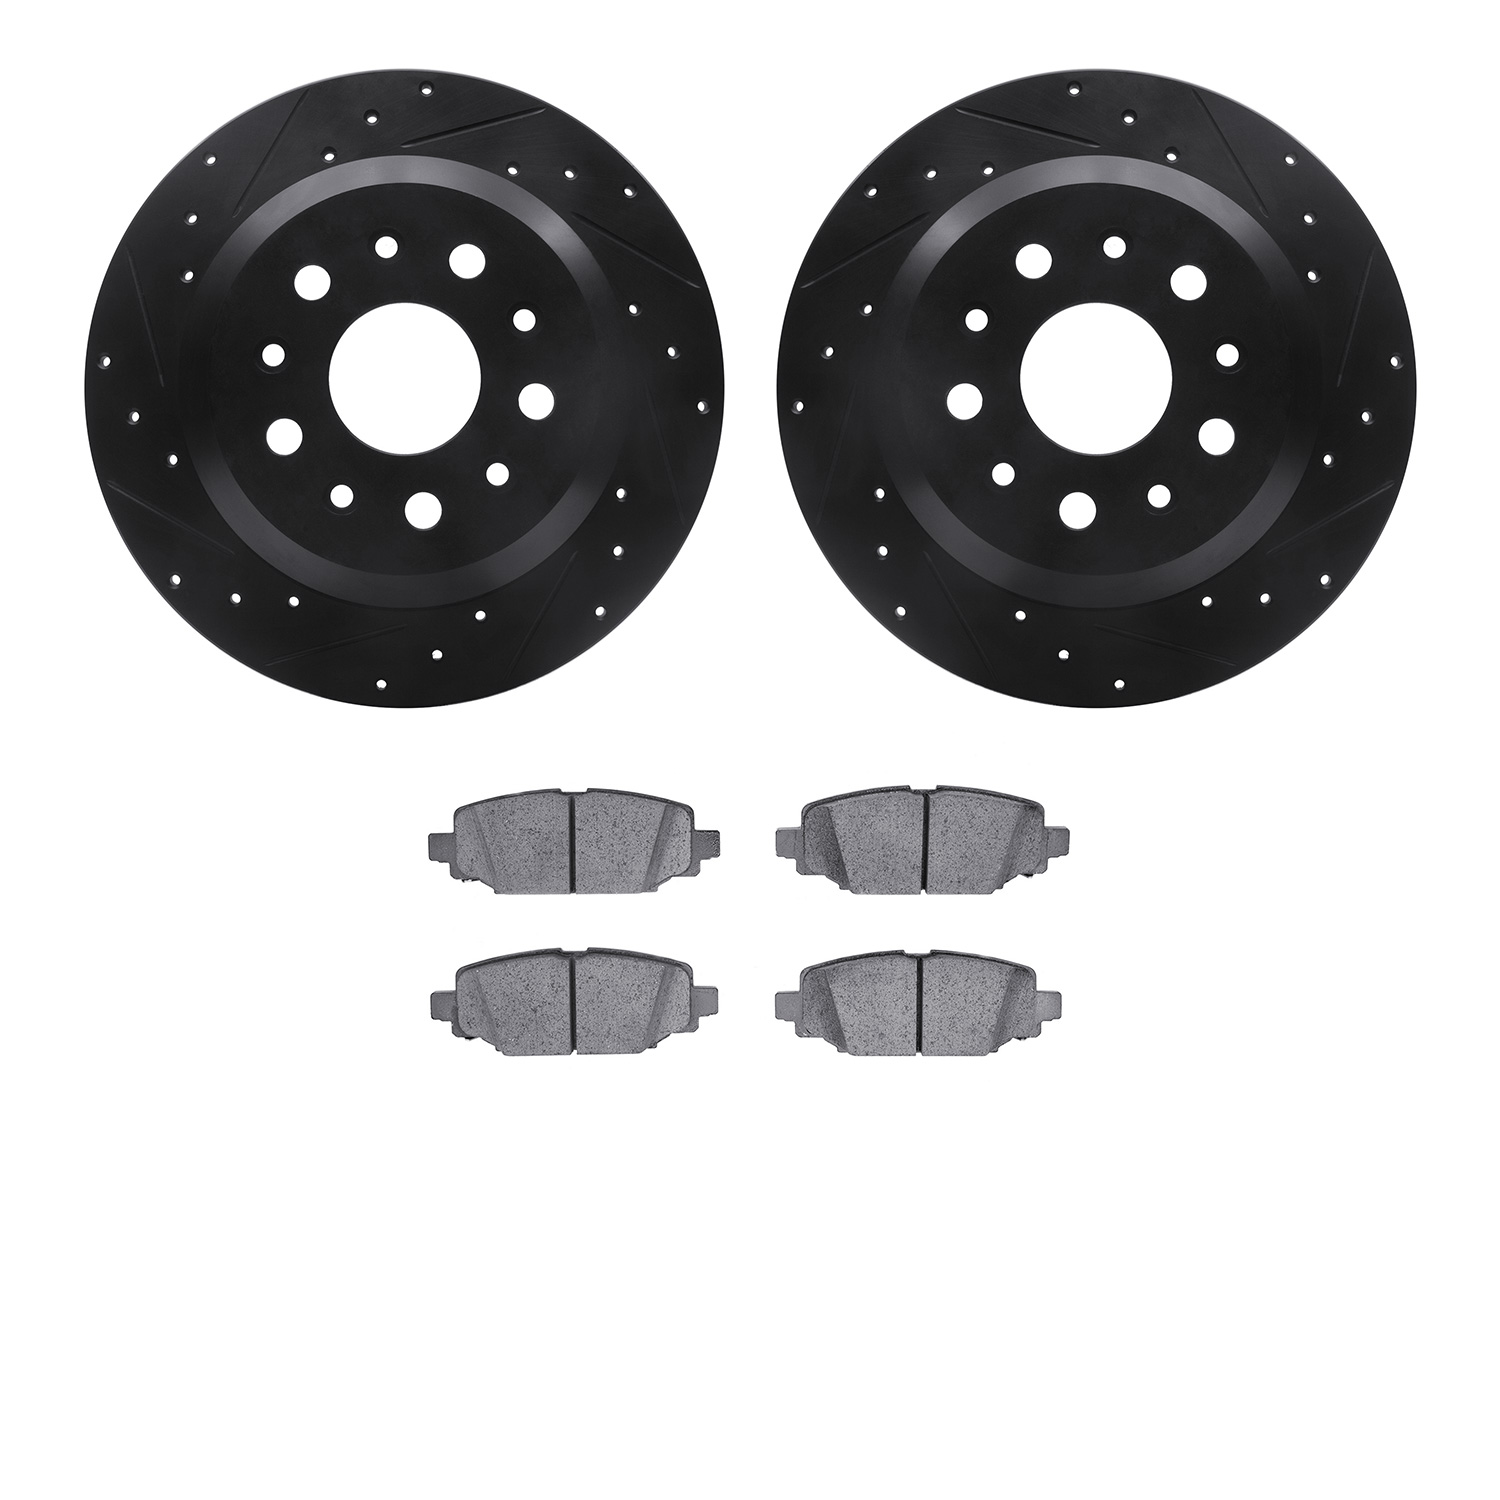 8402-42042 Drilled/Slotted Brake Rotors with Ultimate-Duty Brake Pads Kit [Black], Fits Select Mopar, Position: Rear